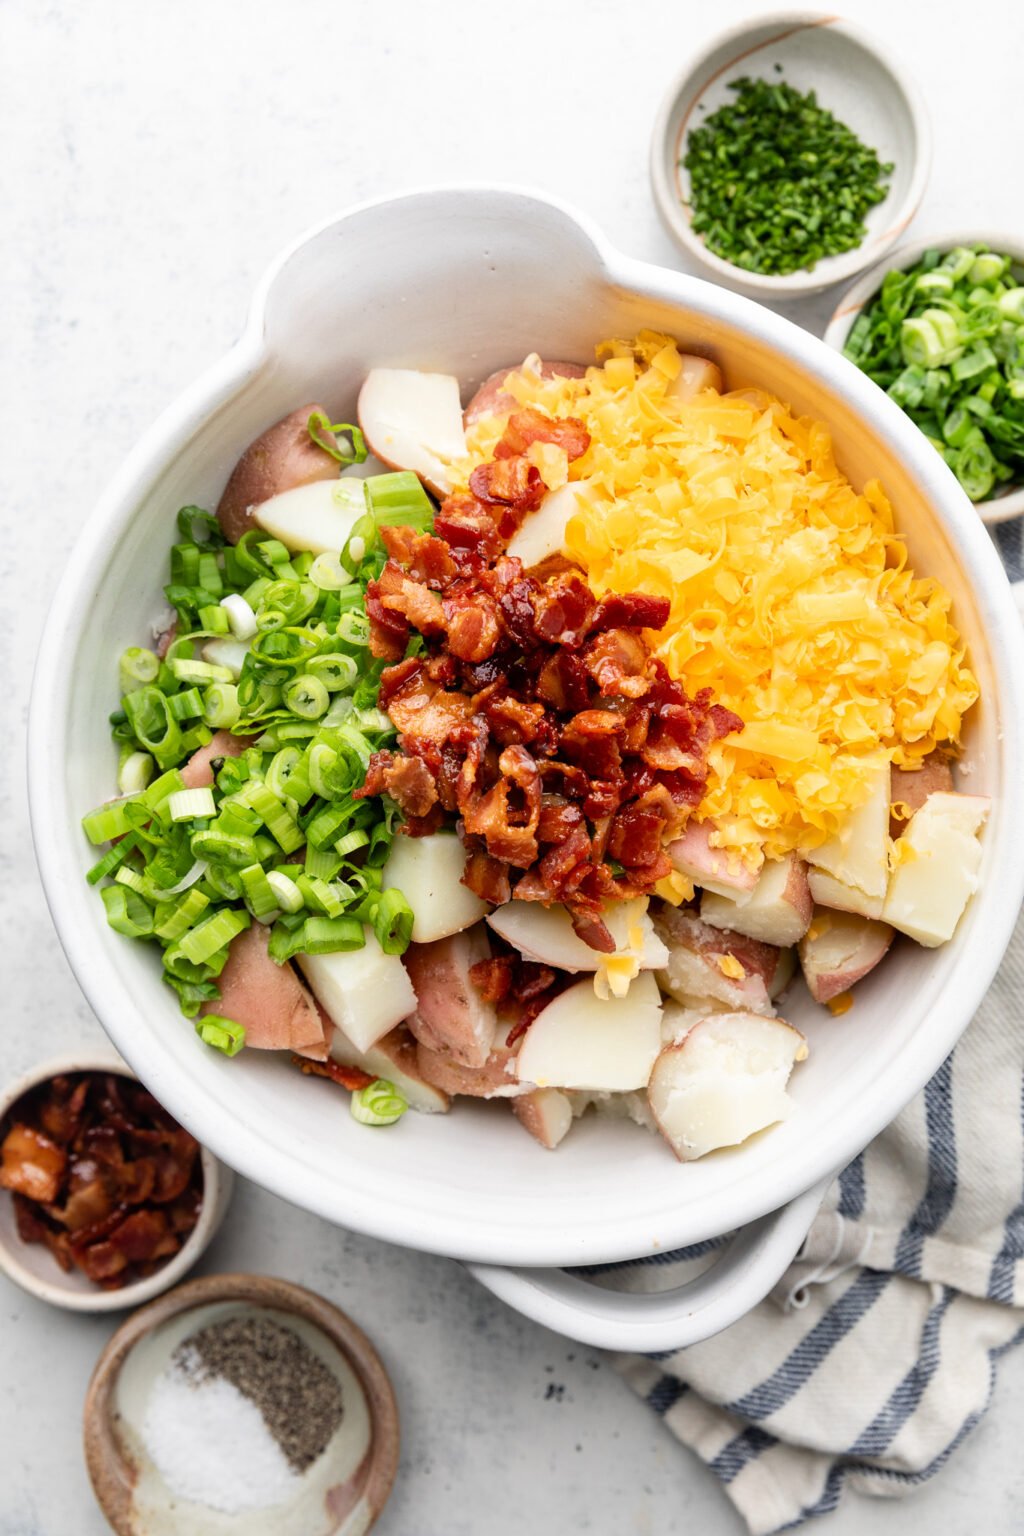 Loaded Baked Potato Salad - All the Healthy Things